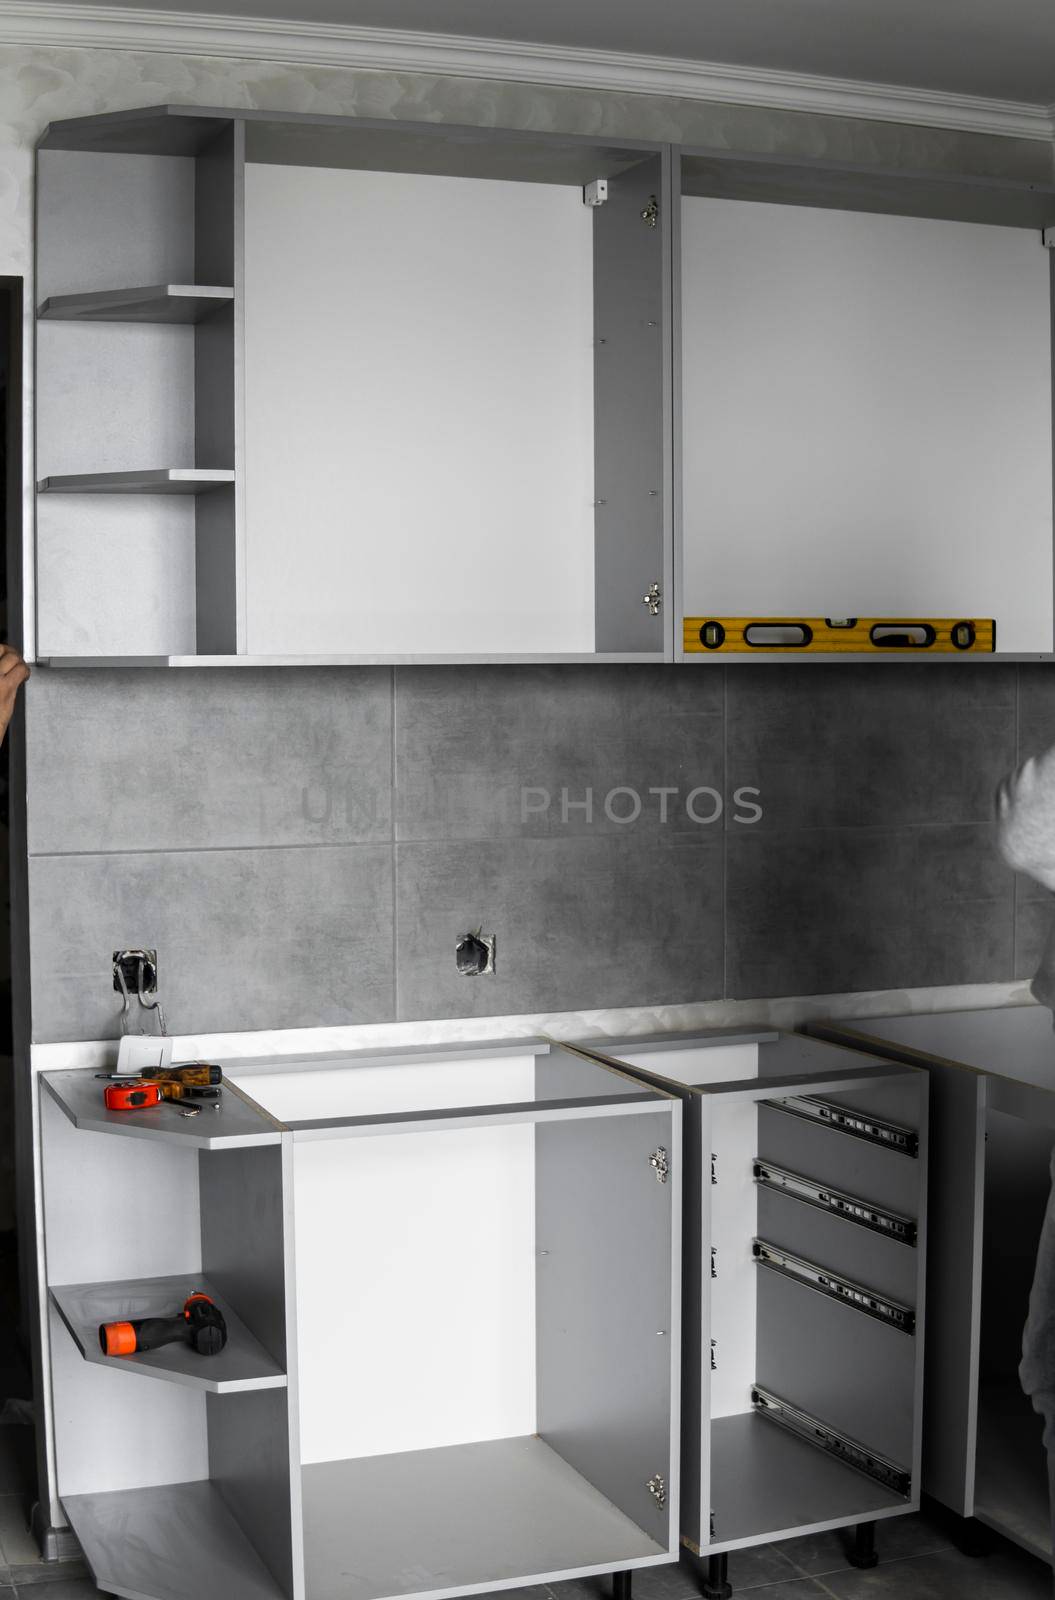 Custom kitchen cabinets installation without a furniture facades mdf. Gray modular kitchen from chipboard material on a various stages of installation in kitchen with a grey tile on floor and walls. by vovsht